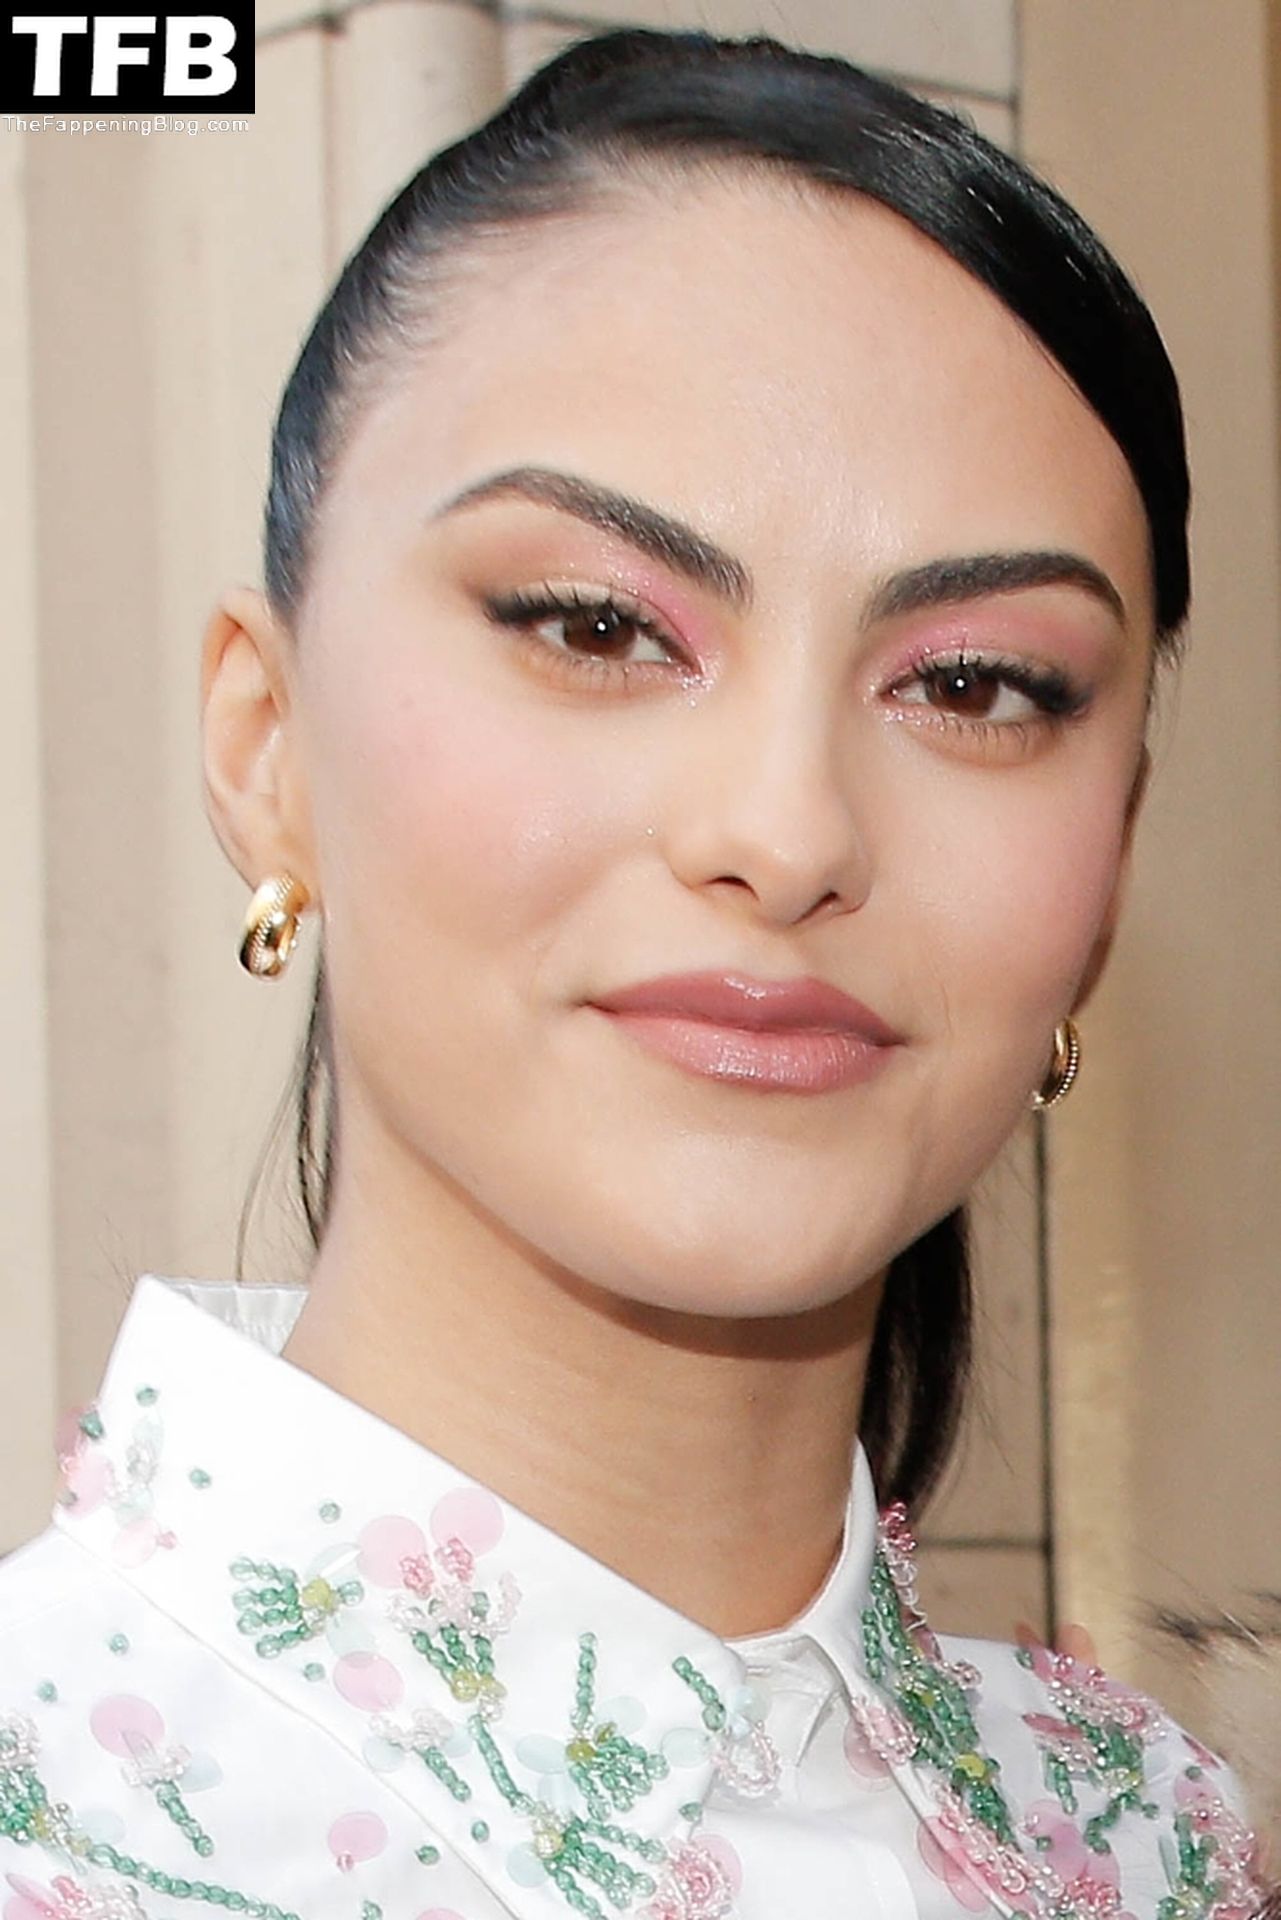 Camila-Mendes-Sexy-The-Fappening-Blog-51.jpg